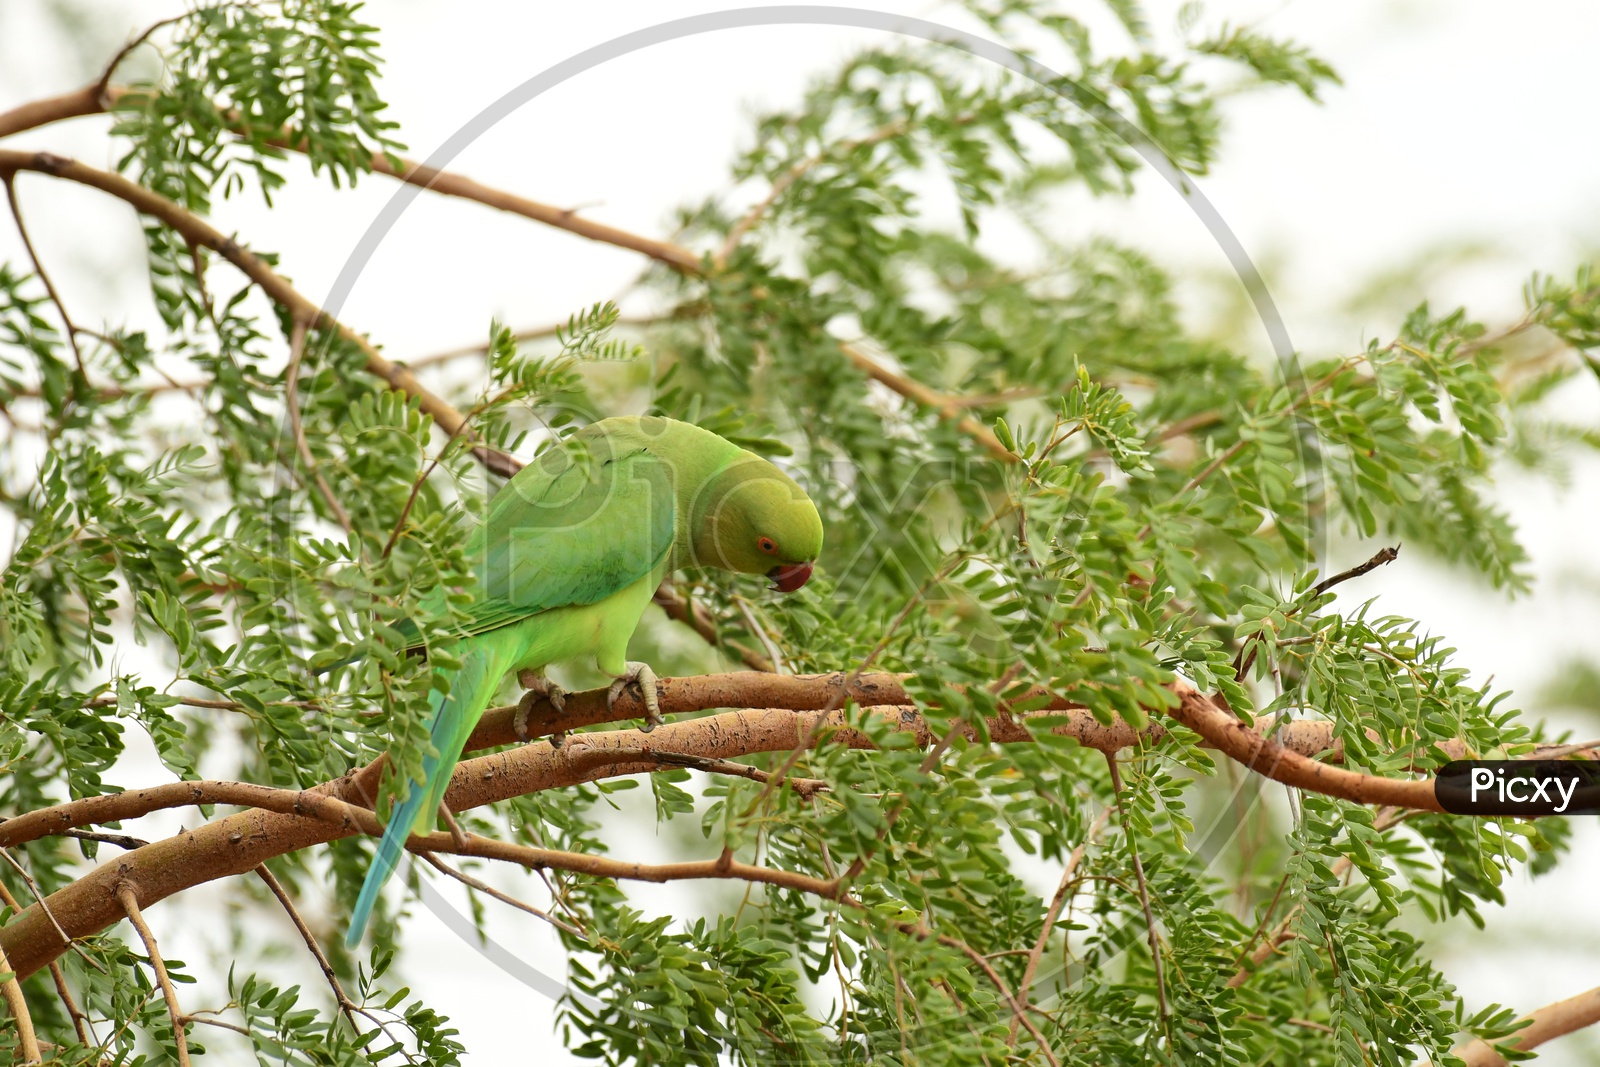 A Parrot on the tree